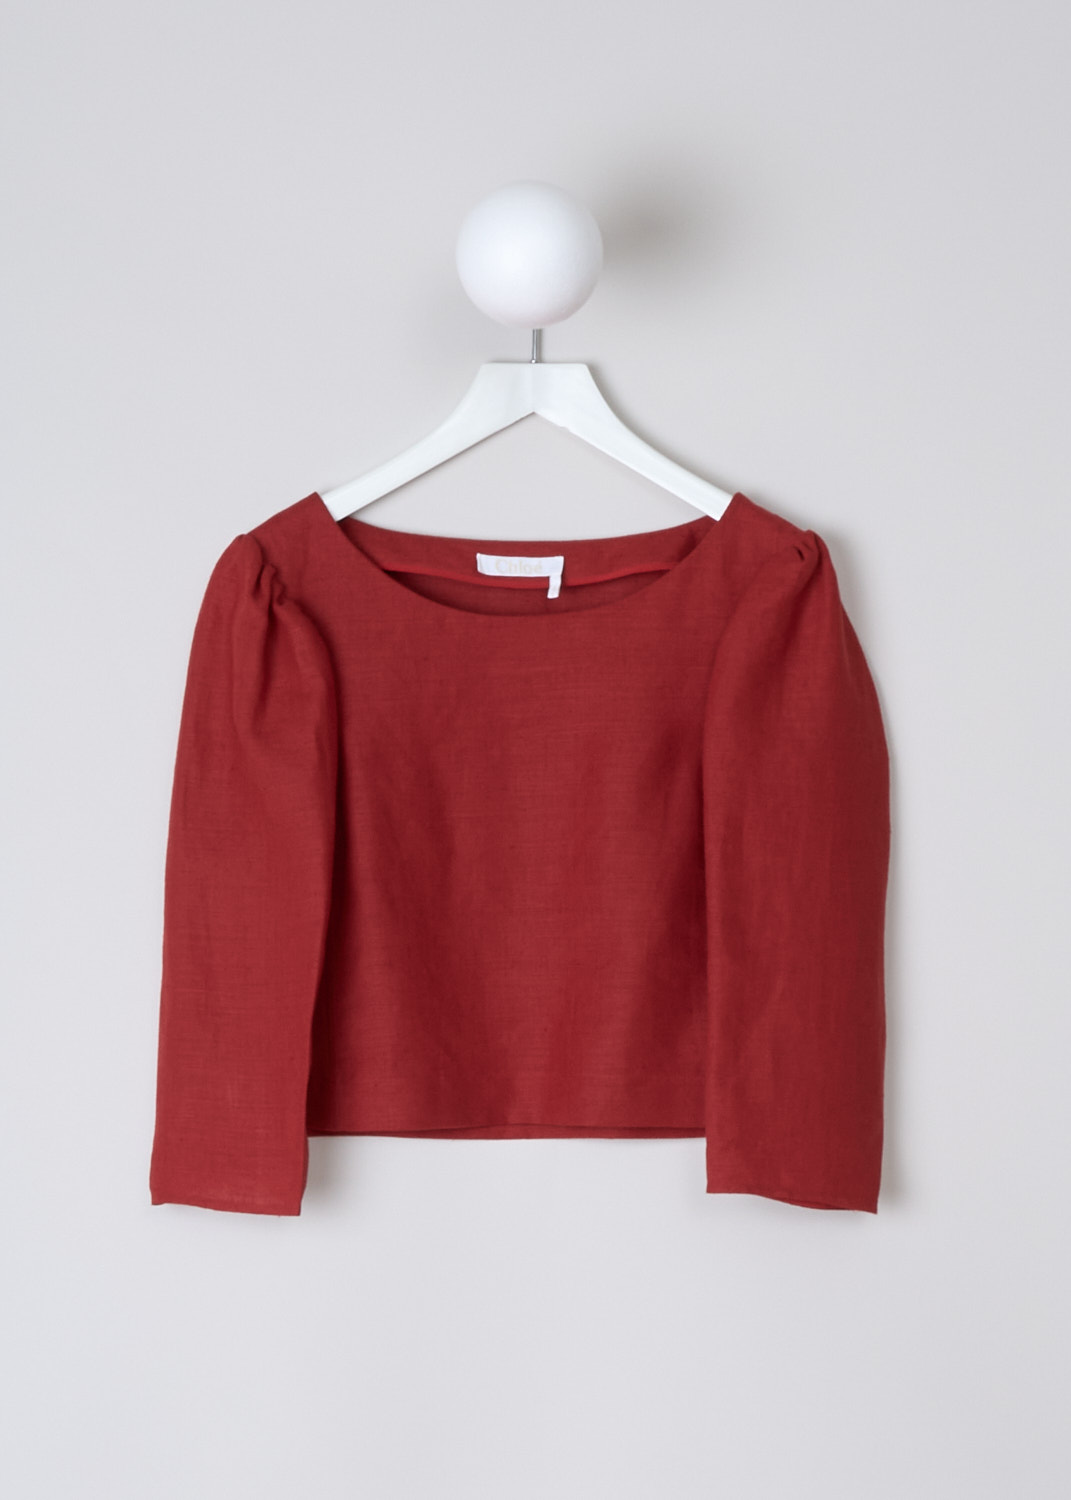 CHLOÉ, CROPPED LINEN TOP IN PEPPERY RED, CHC23UHT13030649_PEPPERY_RED, Red, Front, This Peppery Red linen top has a boat neckline. The long puff sleeves have straight ends. The top has a cropped length and a straight hemline. 
